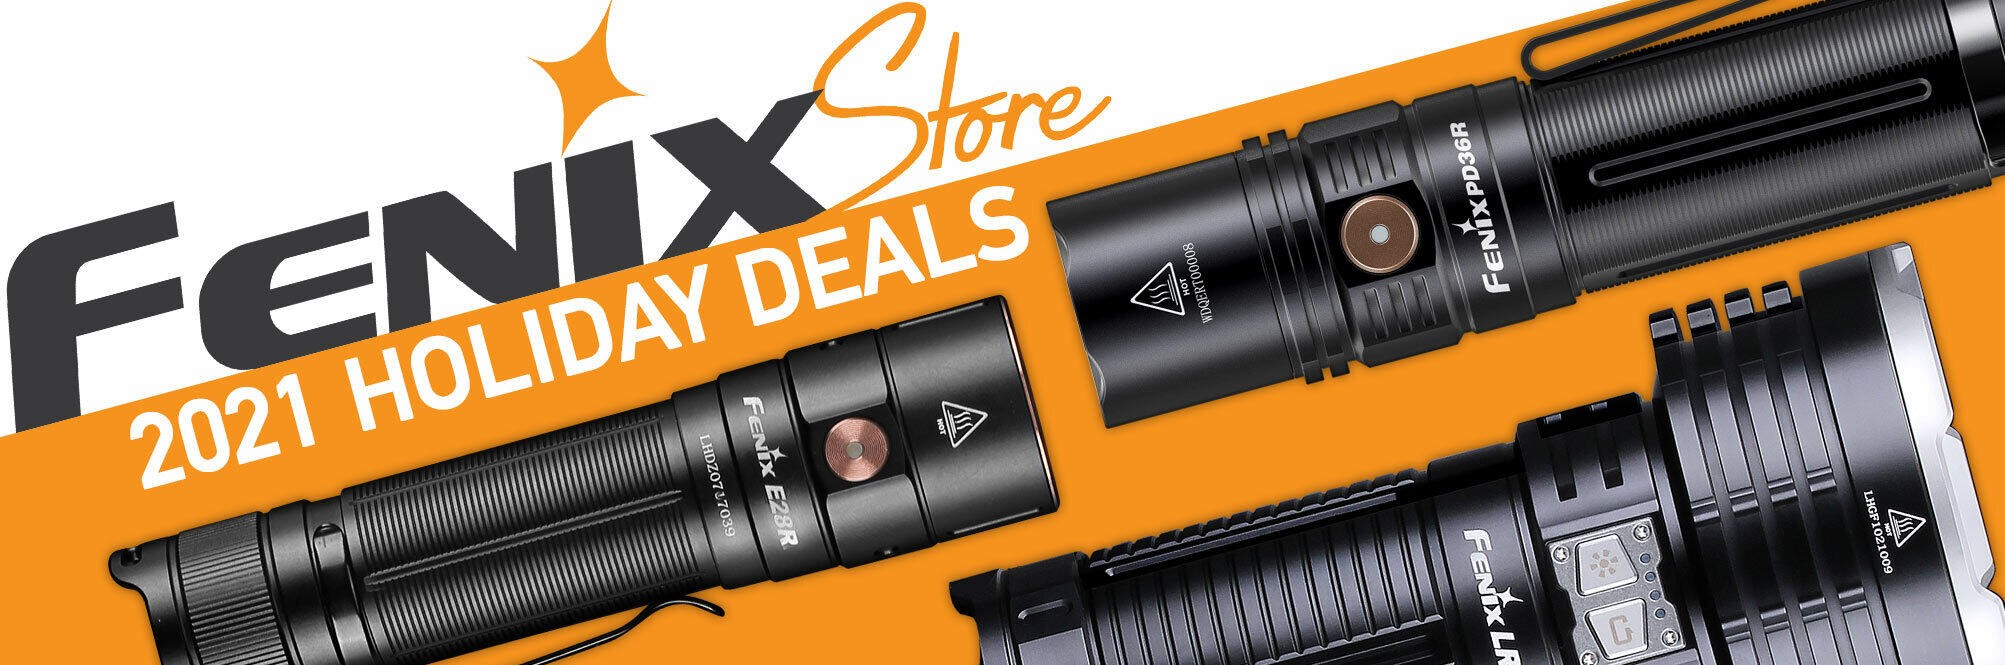 What benefits are offered by the best fenix flashlight?